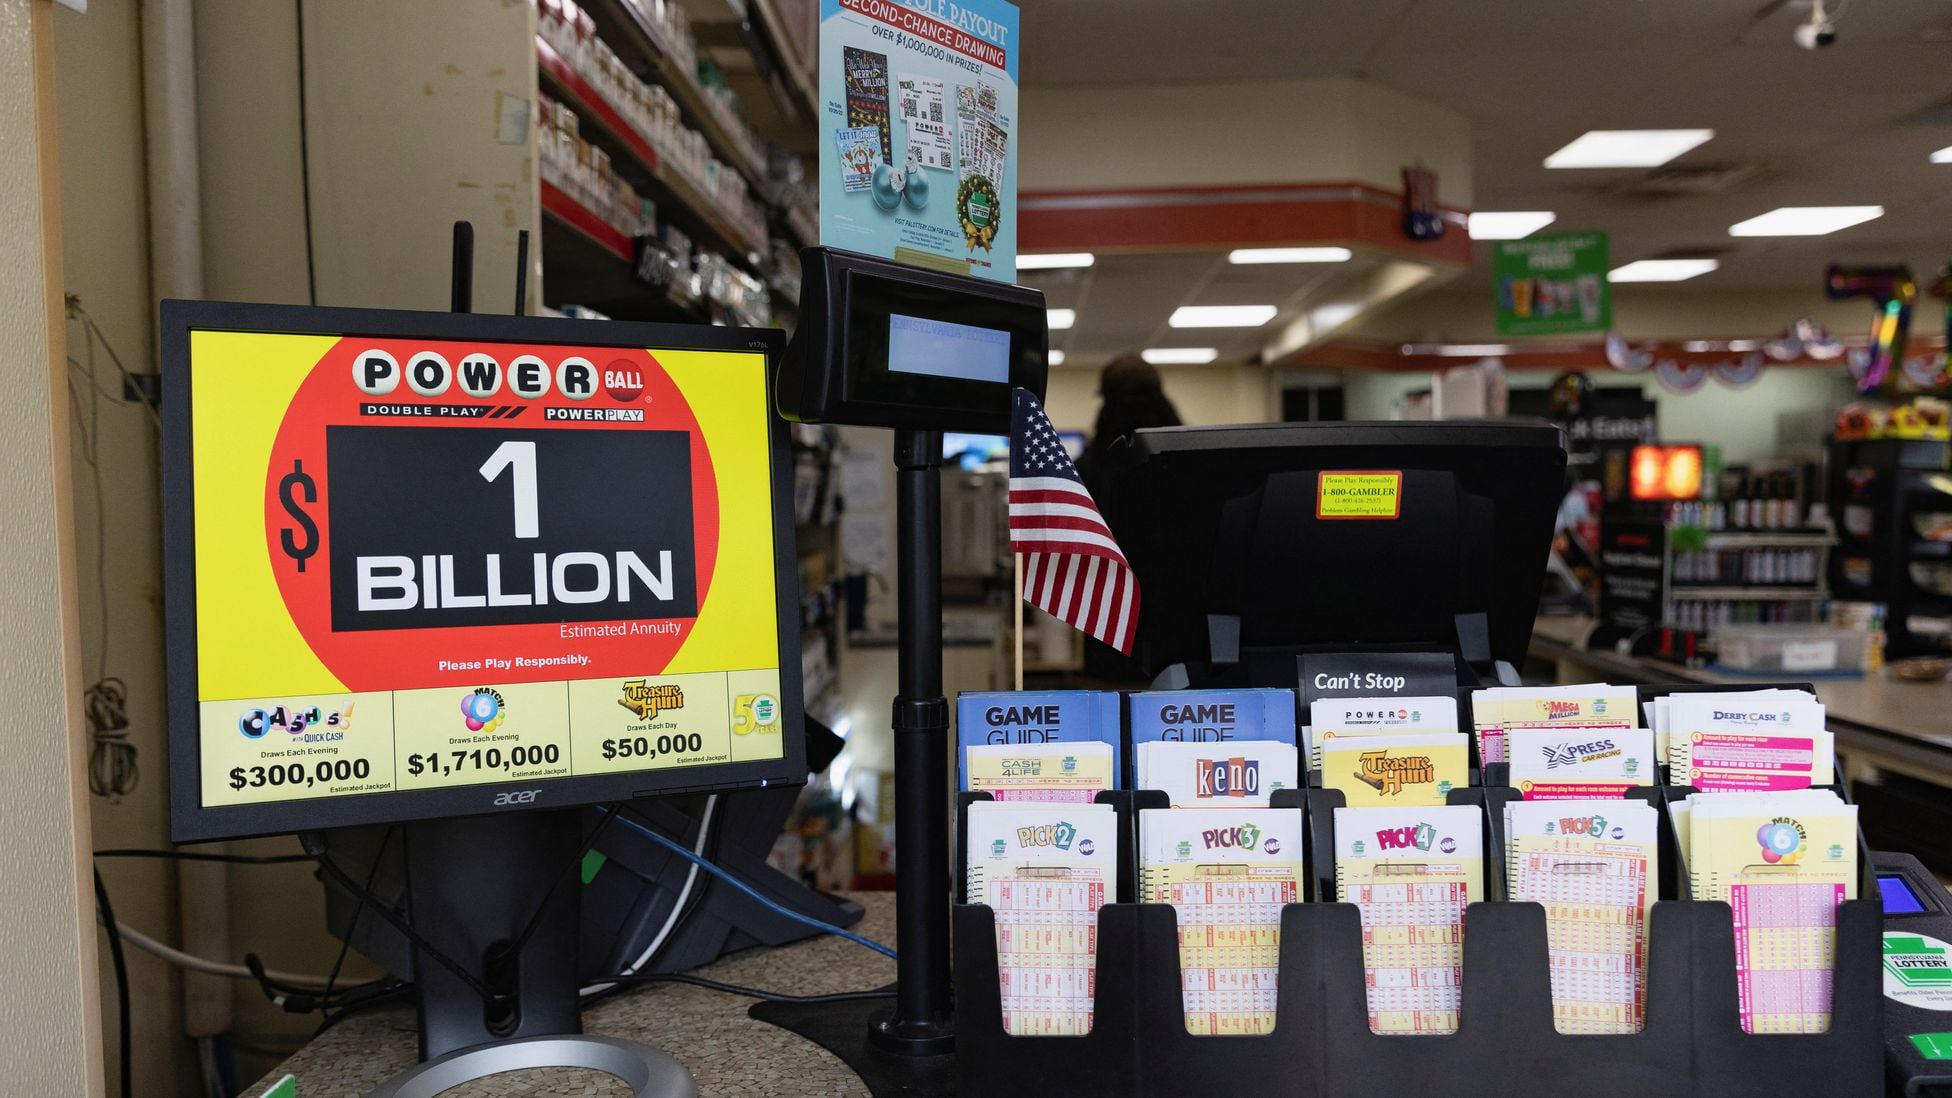 Powerball: Can undocumented immigrants and tourists collect the prize? - AS  USA